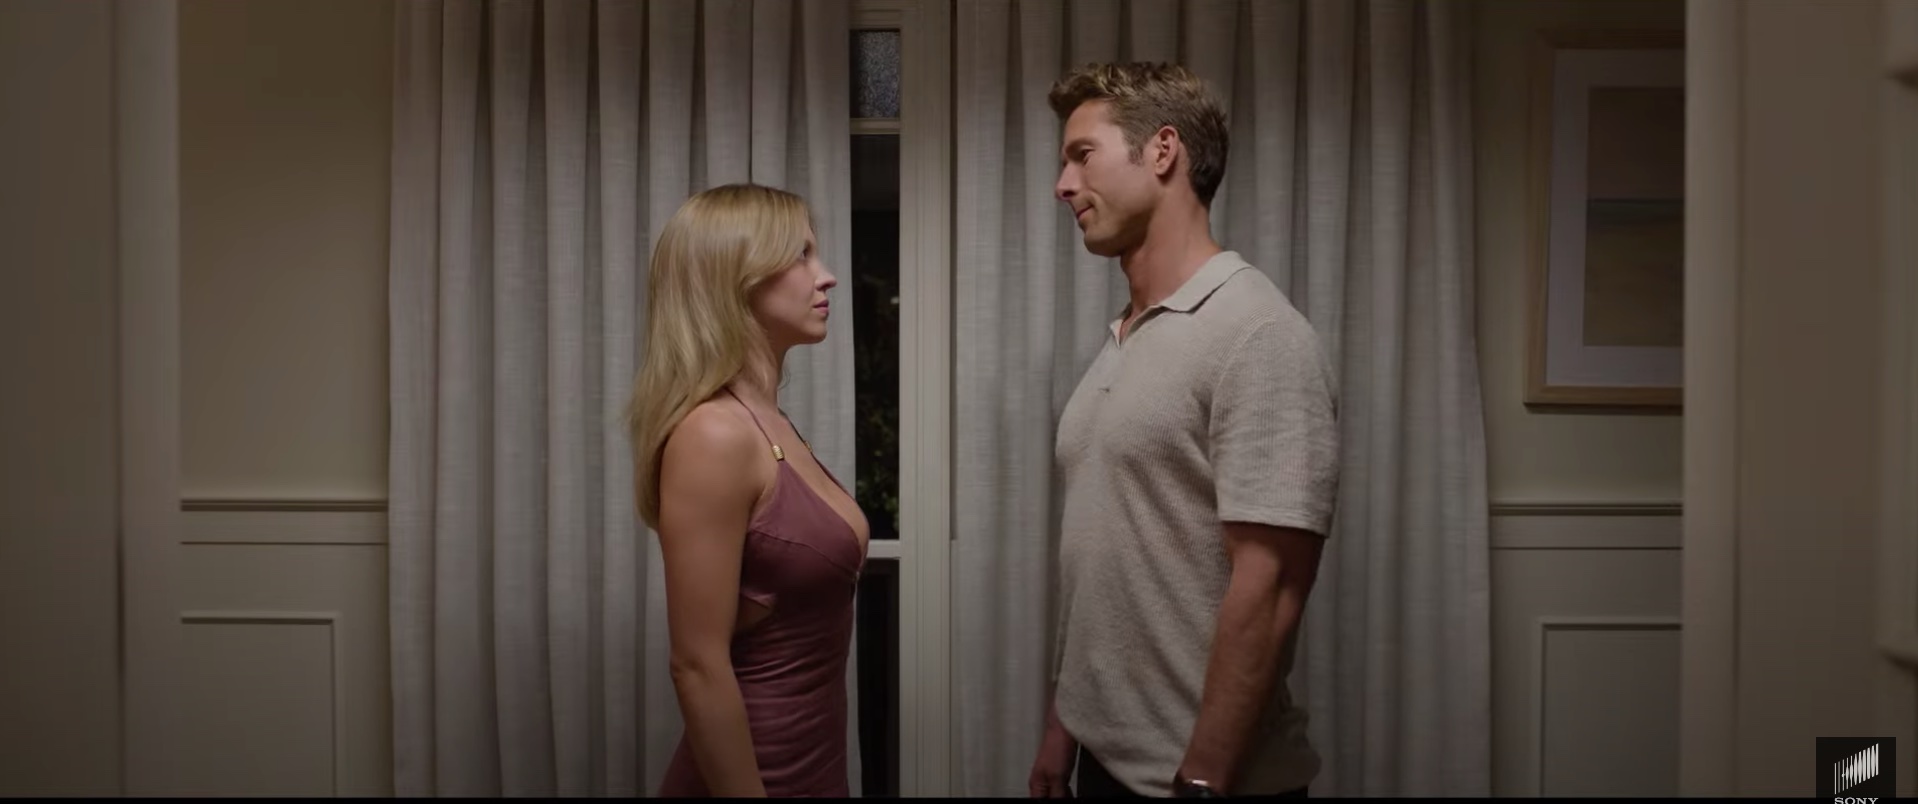 For Anyone But You Movie Release With Glen Powell, Sydney Sweeney